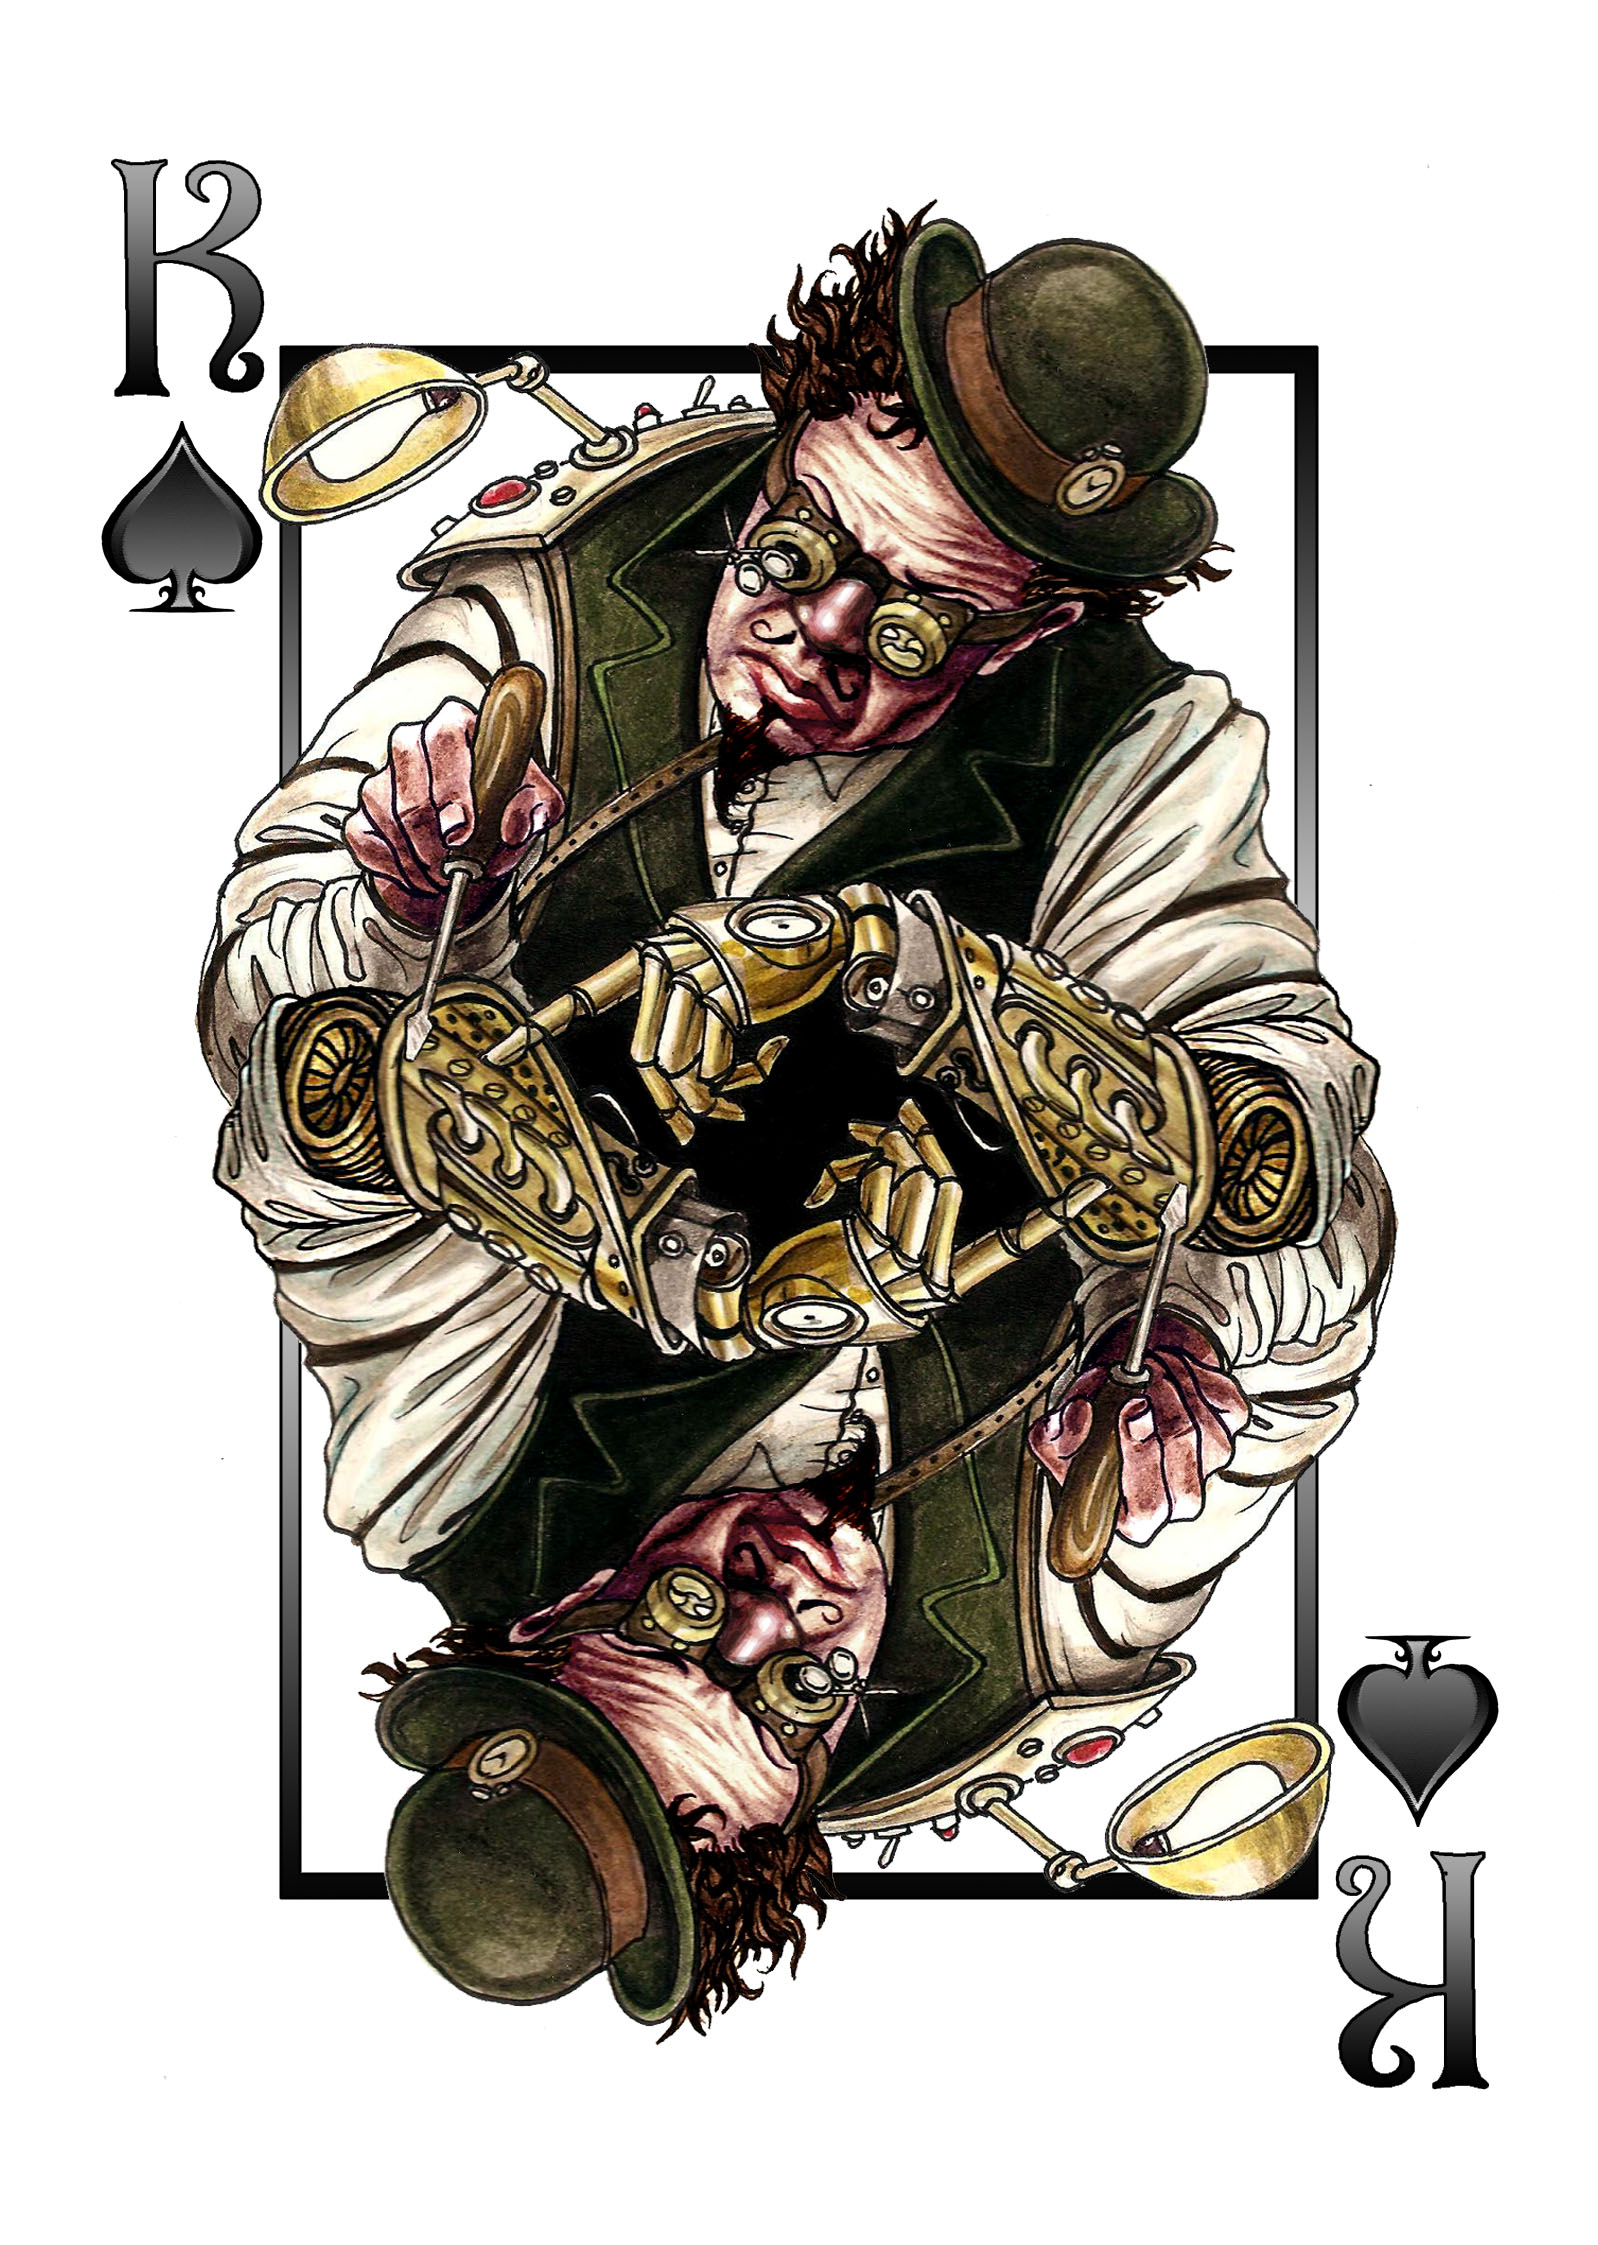 Steampunk Goggles: The Deck – Help make a deck of Steampunk playing cards